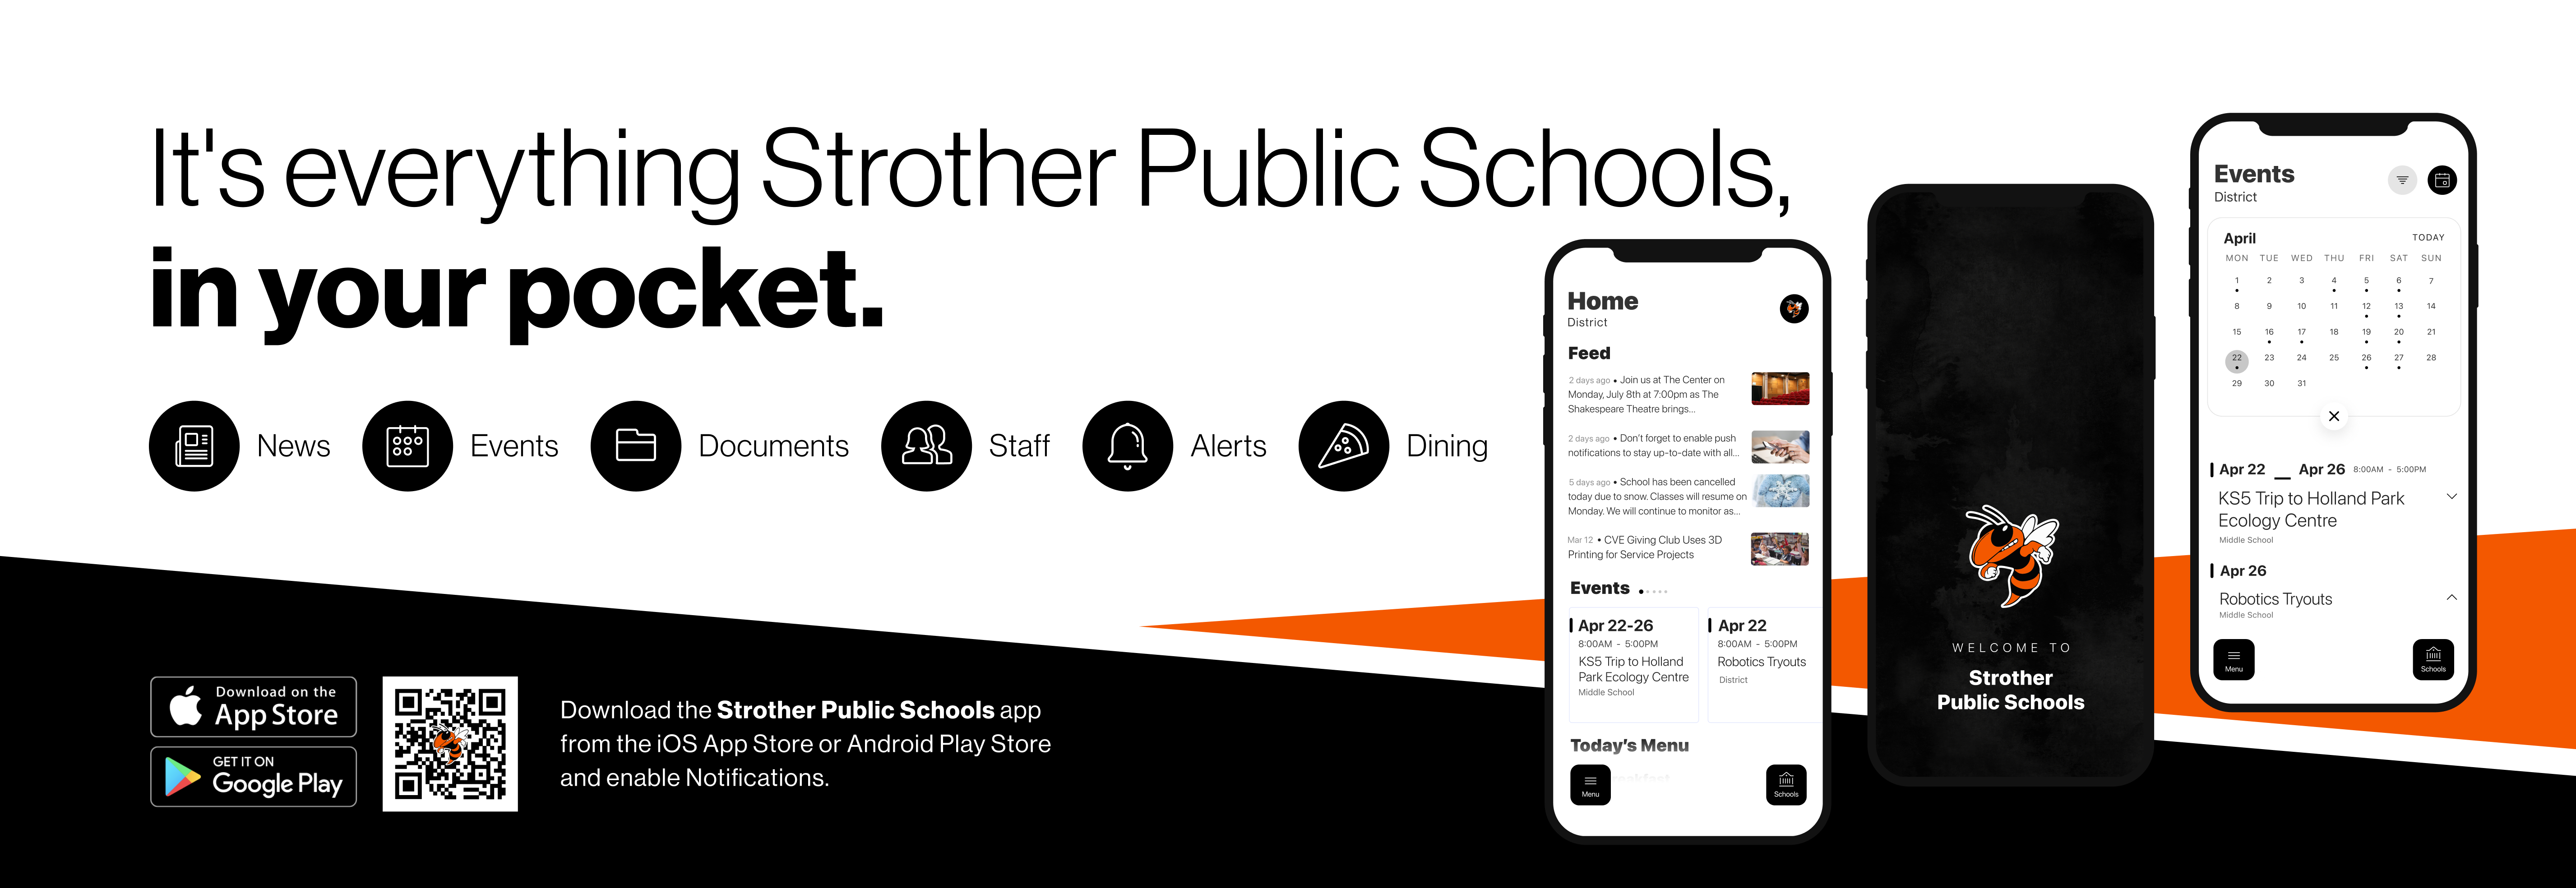 It's everything Strother Public Schools, in your pocket. Home Feed © News © Events B Documents AB Staff Alerts Dining Events . 1 Apr 22-26 KSb Trip to Holland | Apr 22 Download on the App Store GET IT ON Google Play Download the Strother Public Schools app from the iOS App Store or Android Play Store and enable Notifications.